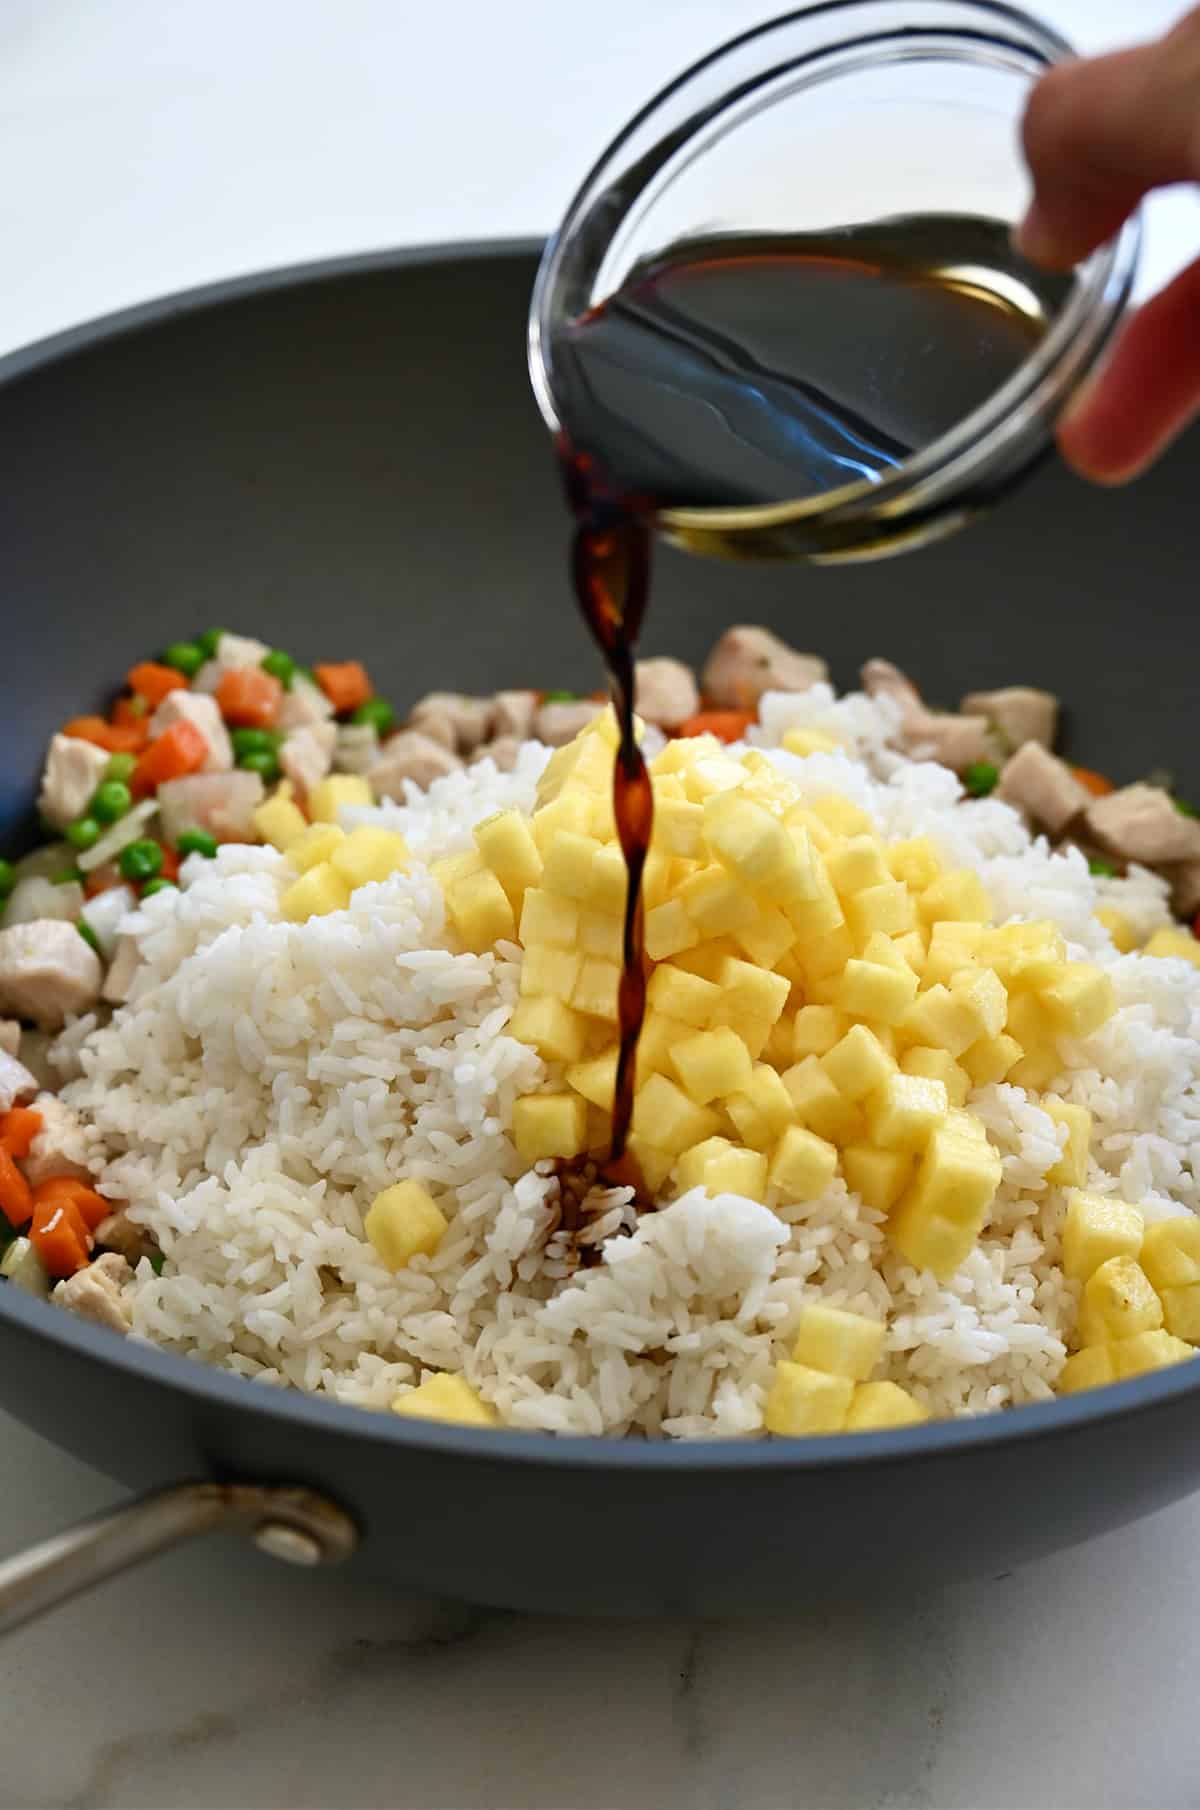 Soy sauce being poured from a small bowl over diced pineapple and rice in a wok.